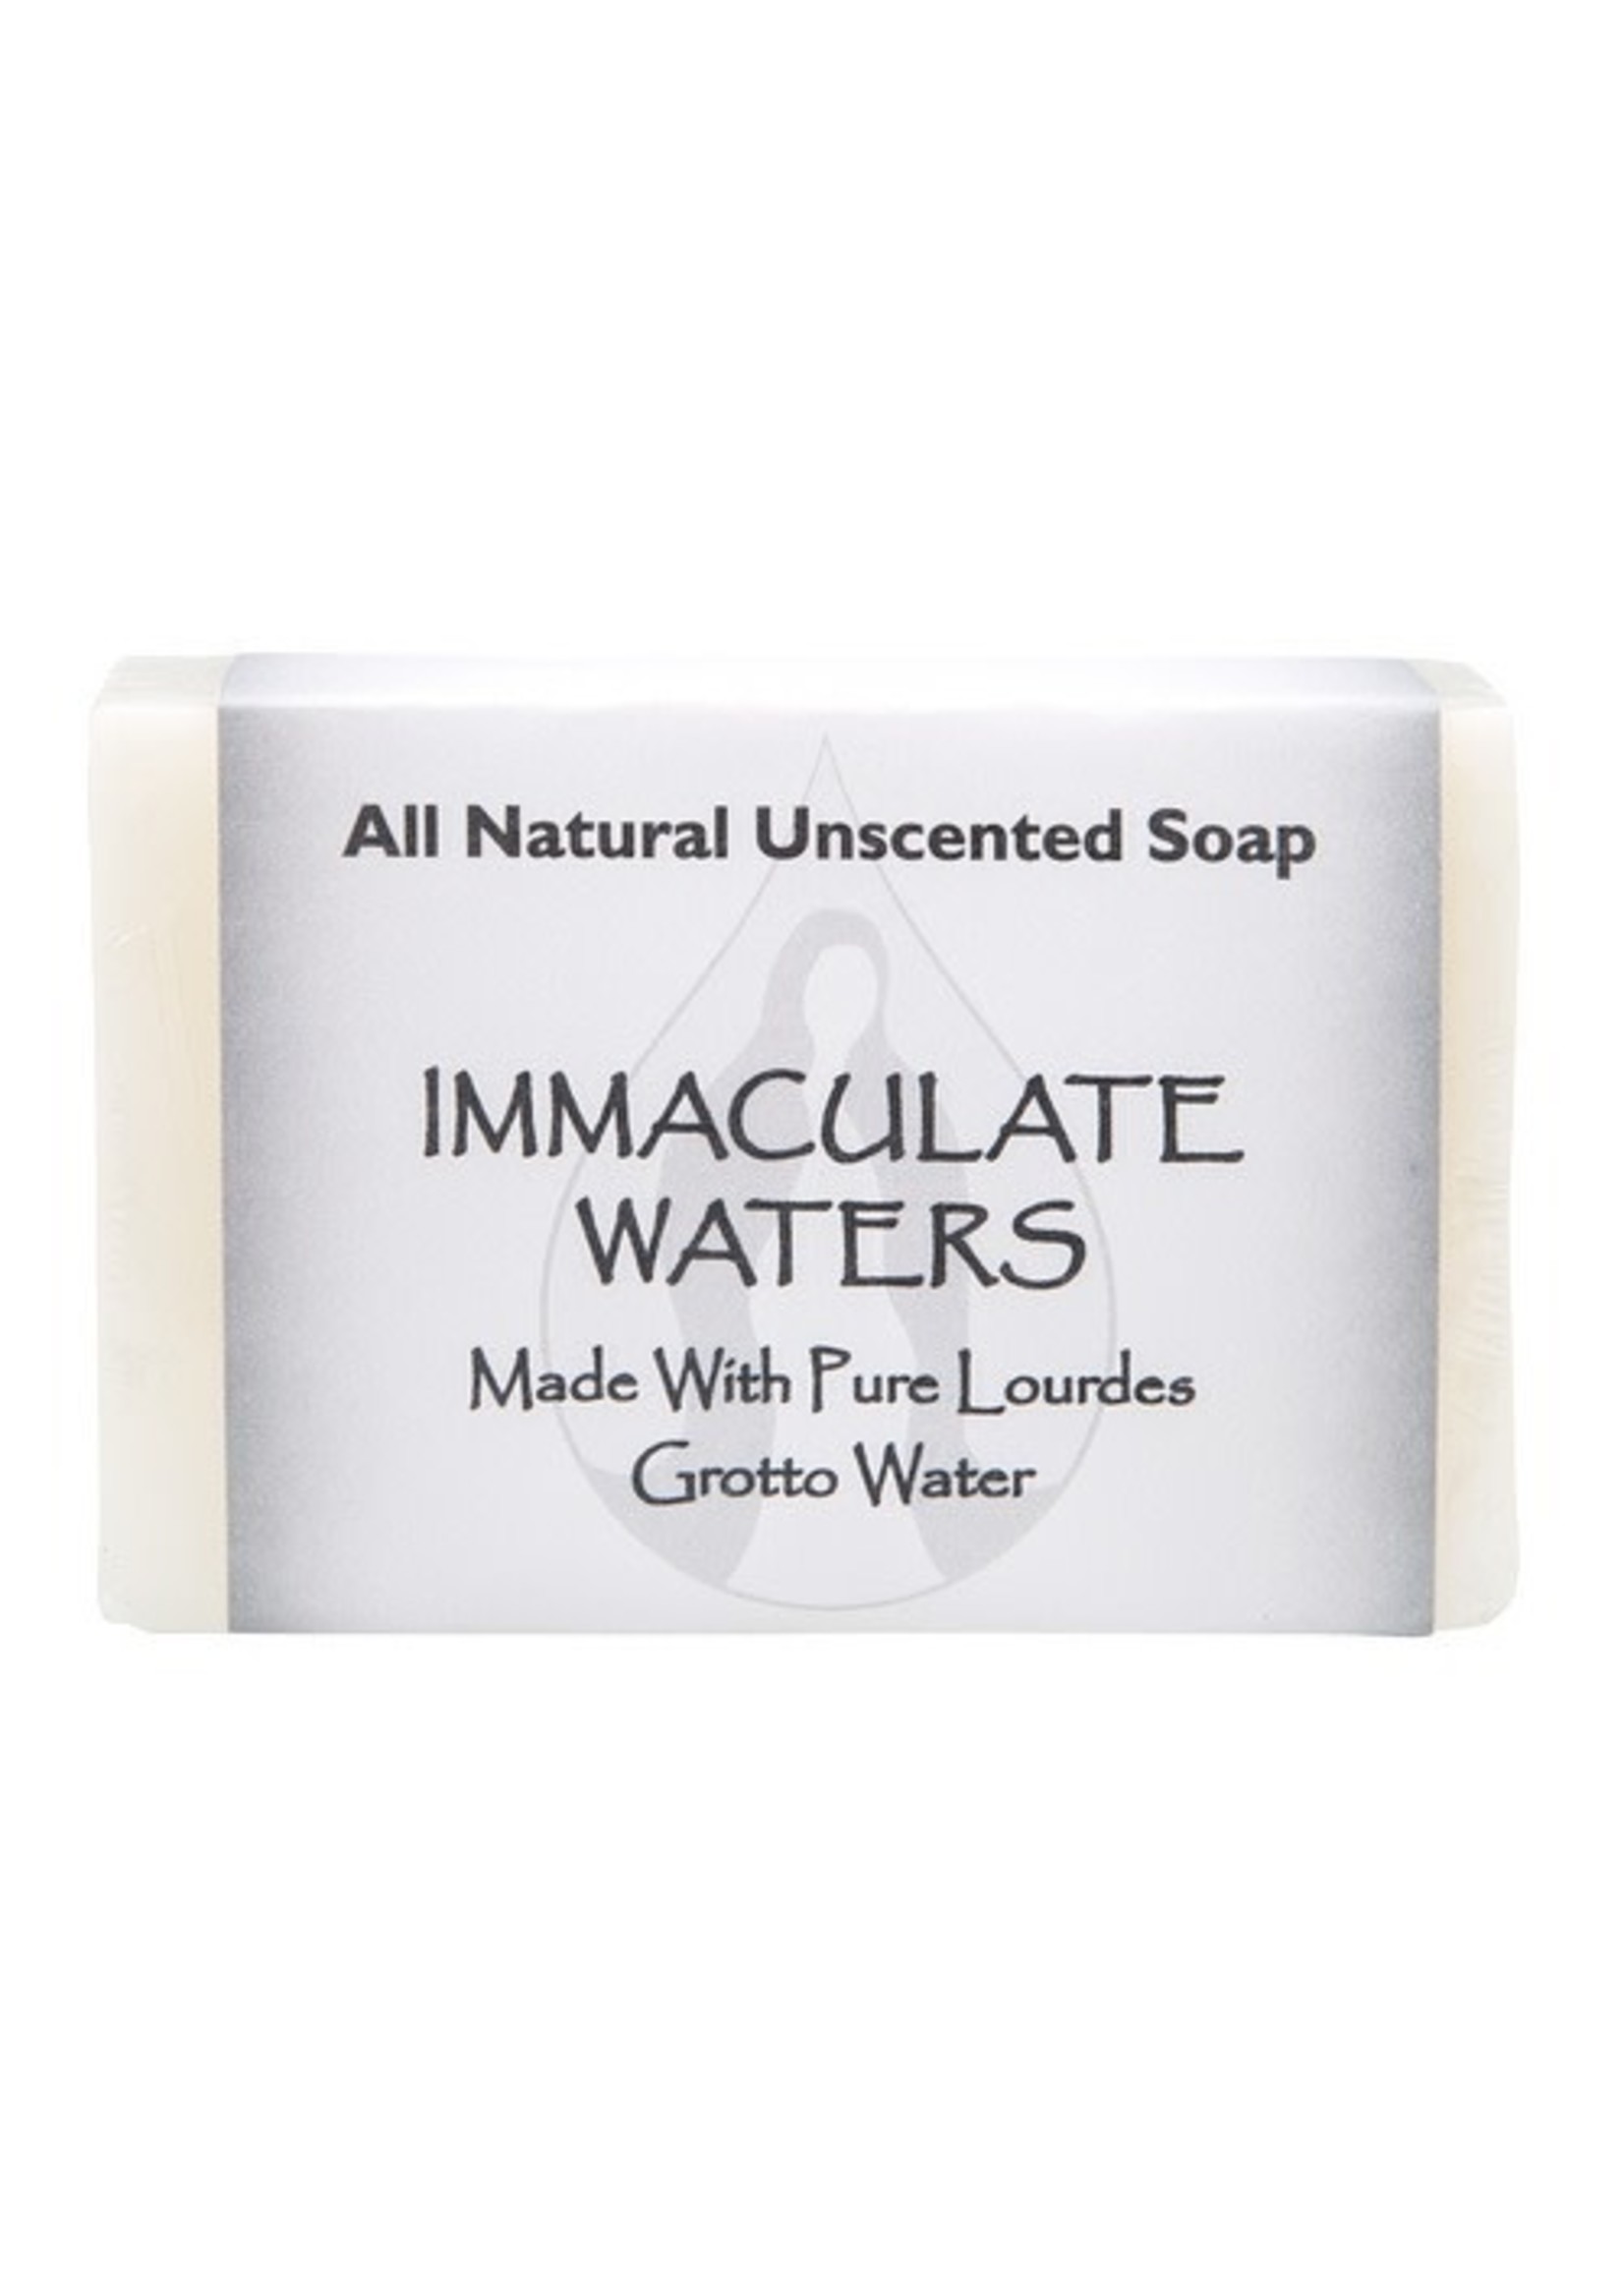 Immaculate Waters Immaculate Waters Unscented Bar Soap